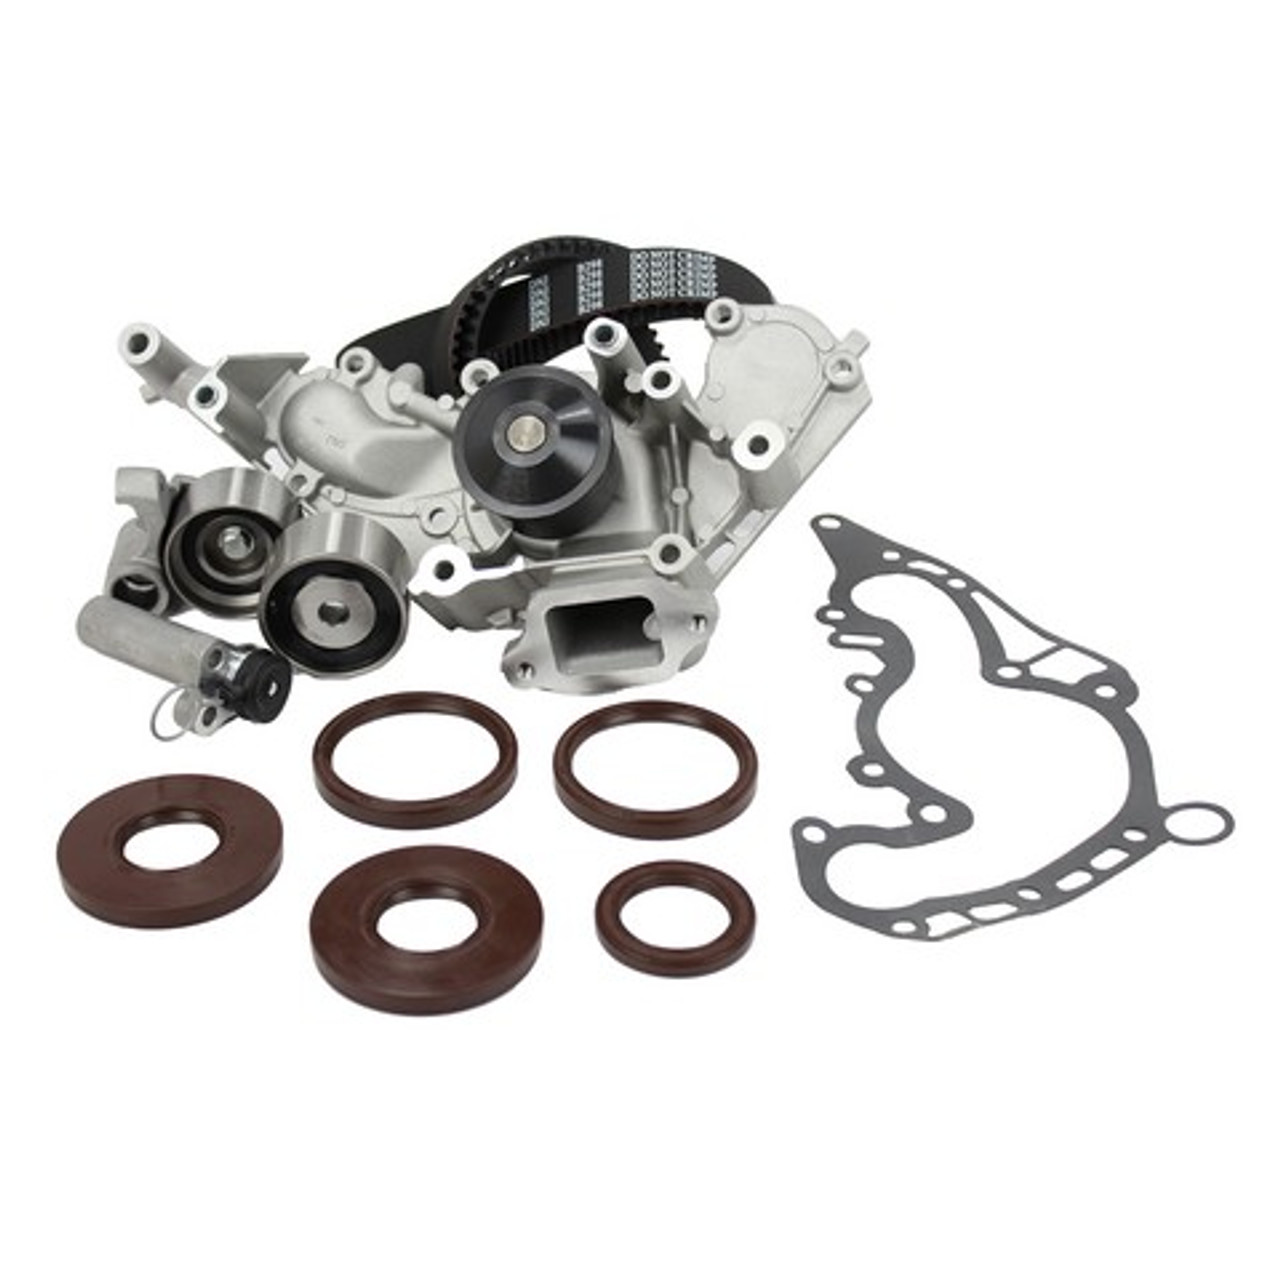 Timing Belt Kit with Water Pump 4.7L 2006 Toyota Tundra - TBK971WP.81